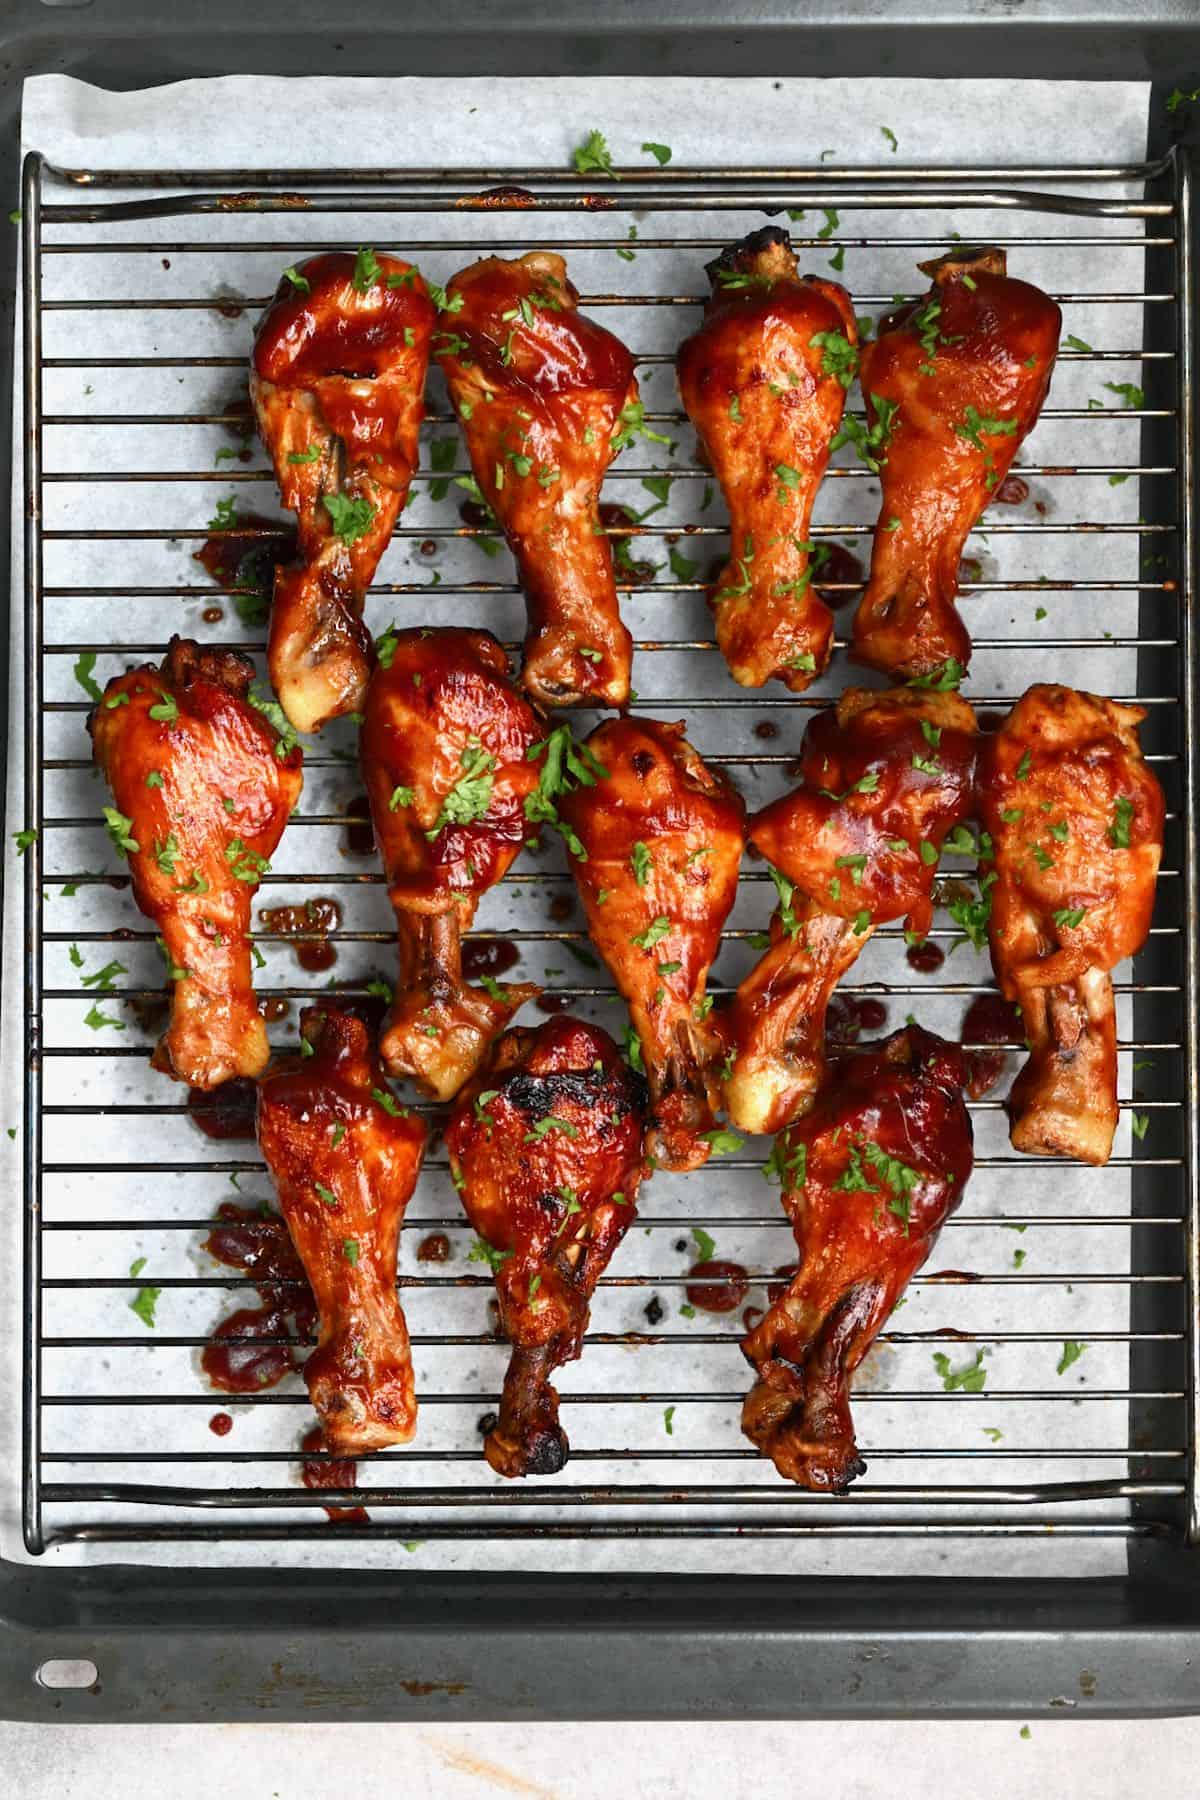 Crock pot chicken drumsticks on a baking tray after broiling